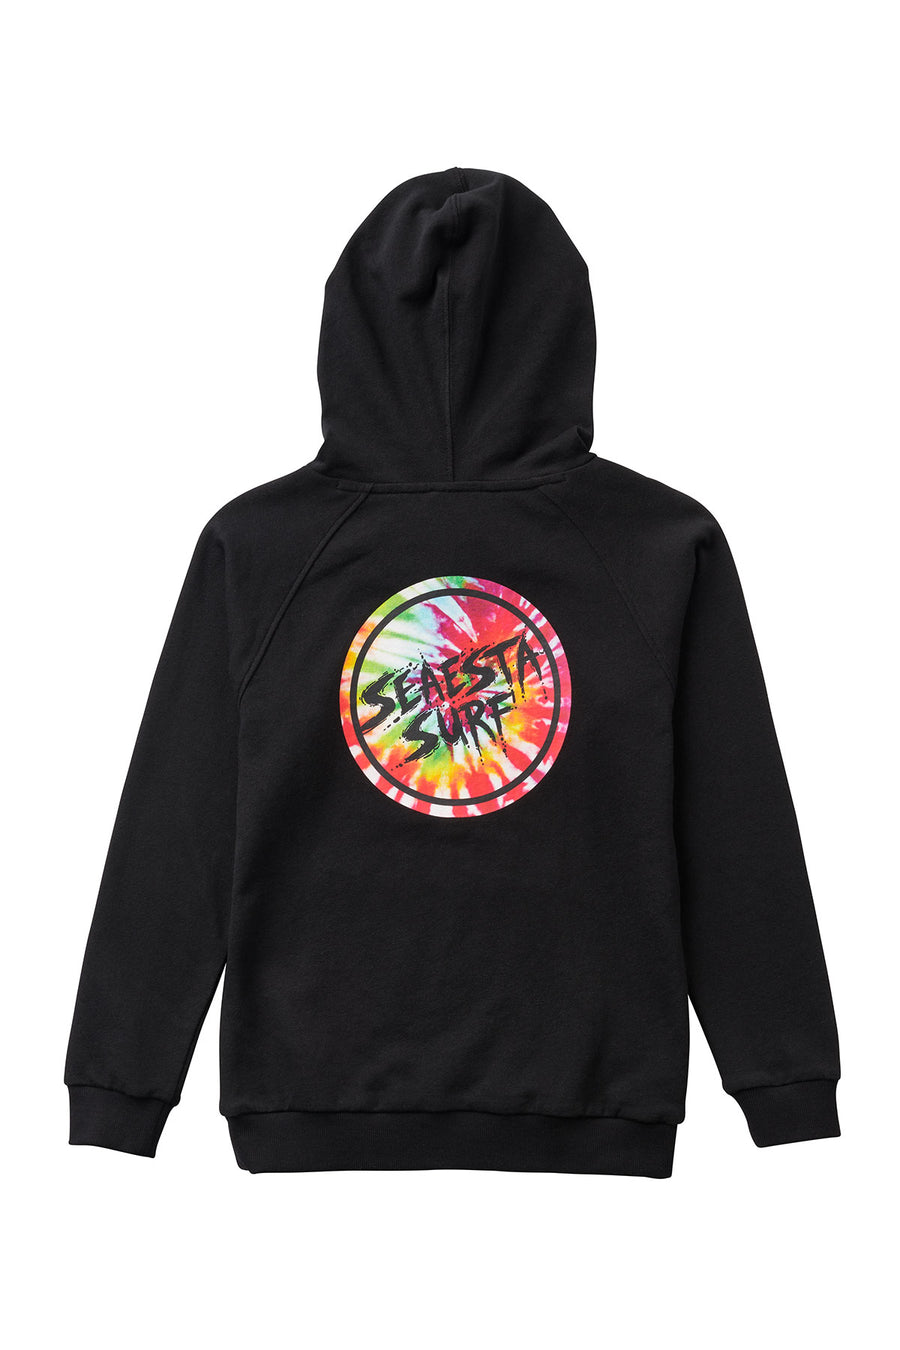 Seaesta Surf Black Hoodie with Tie Dye Graphic / Youth